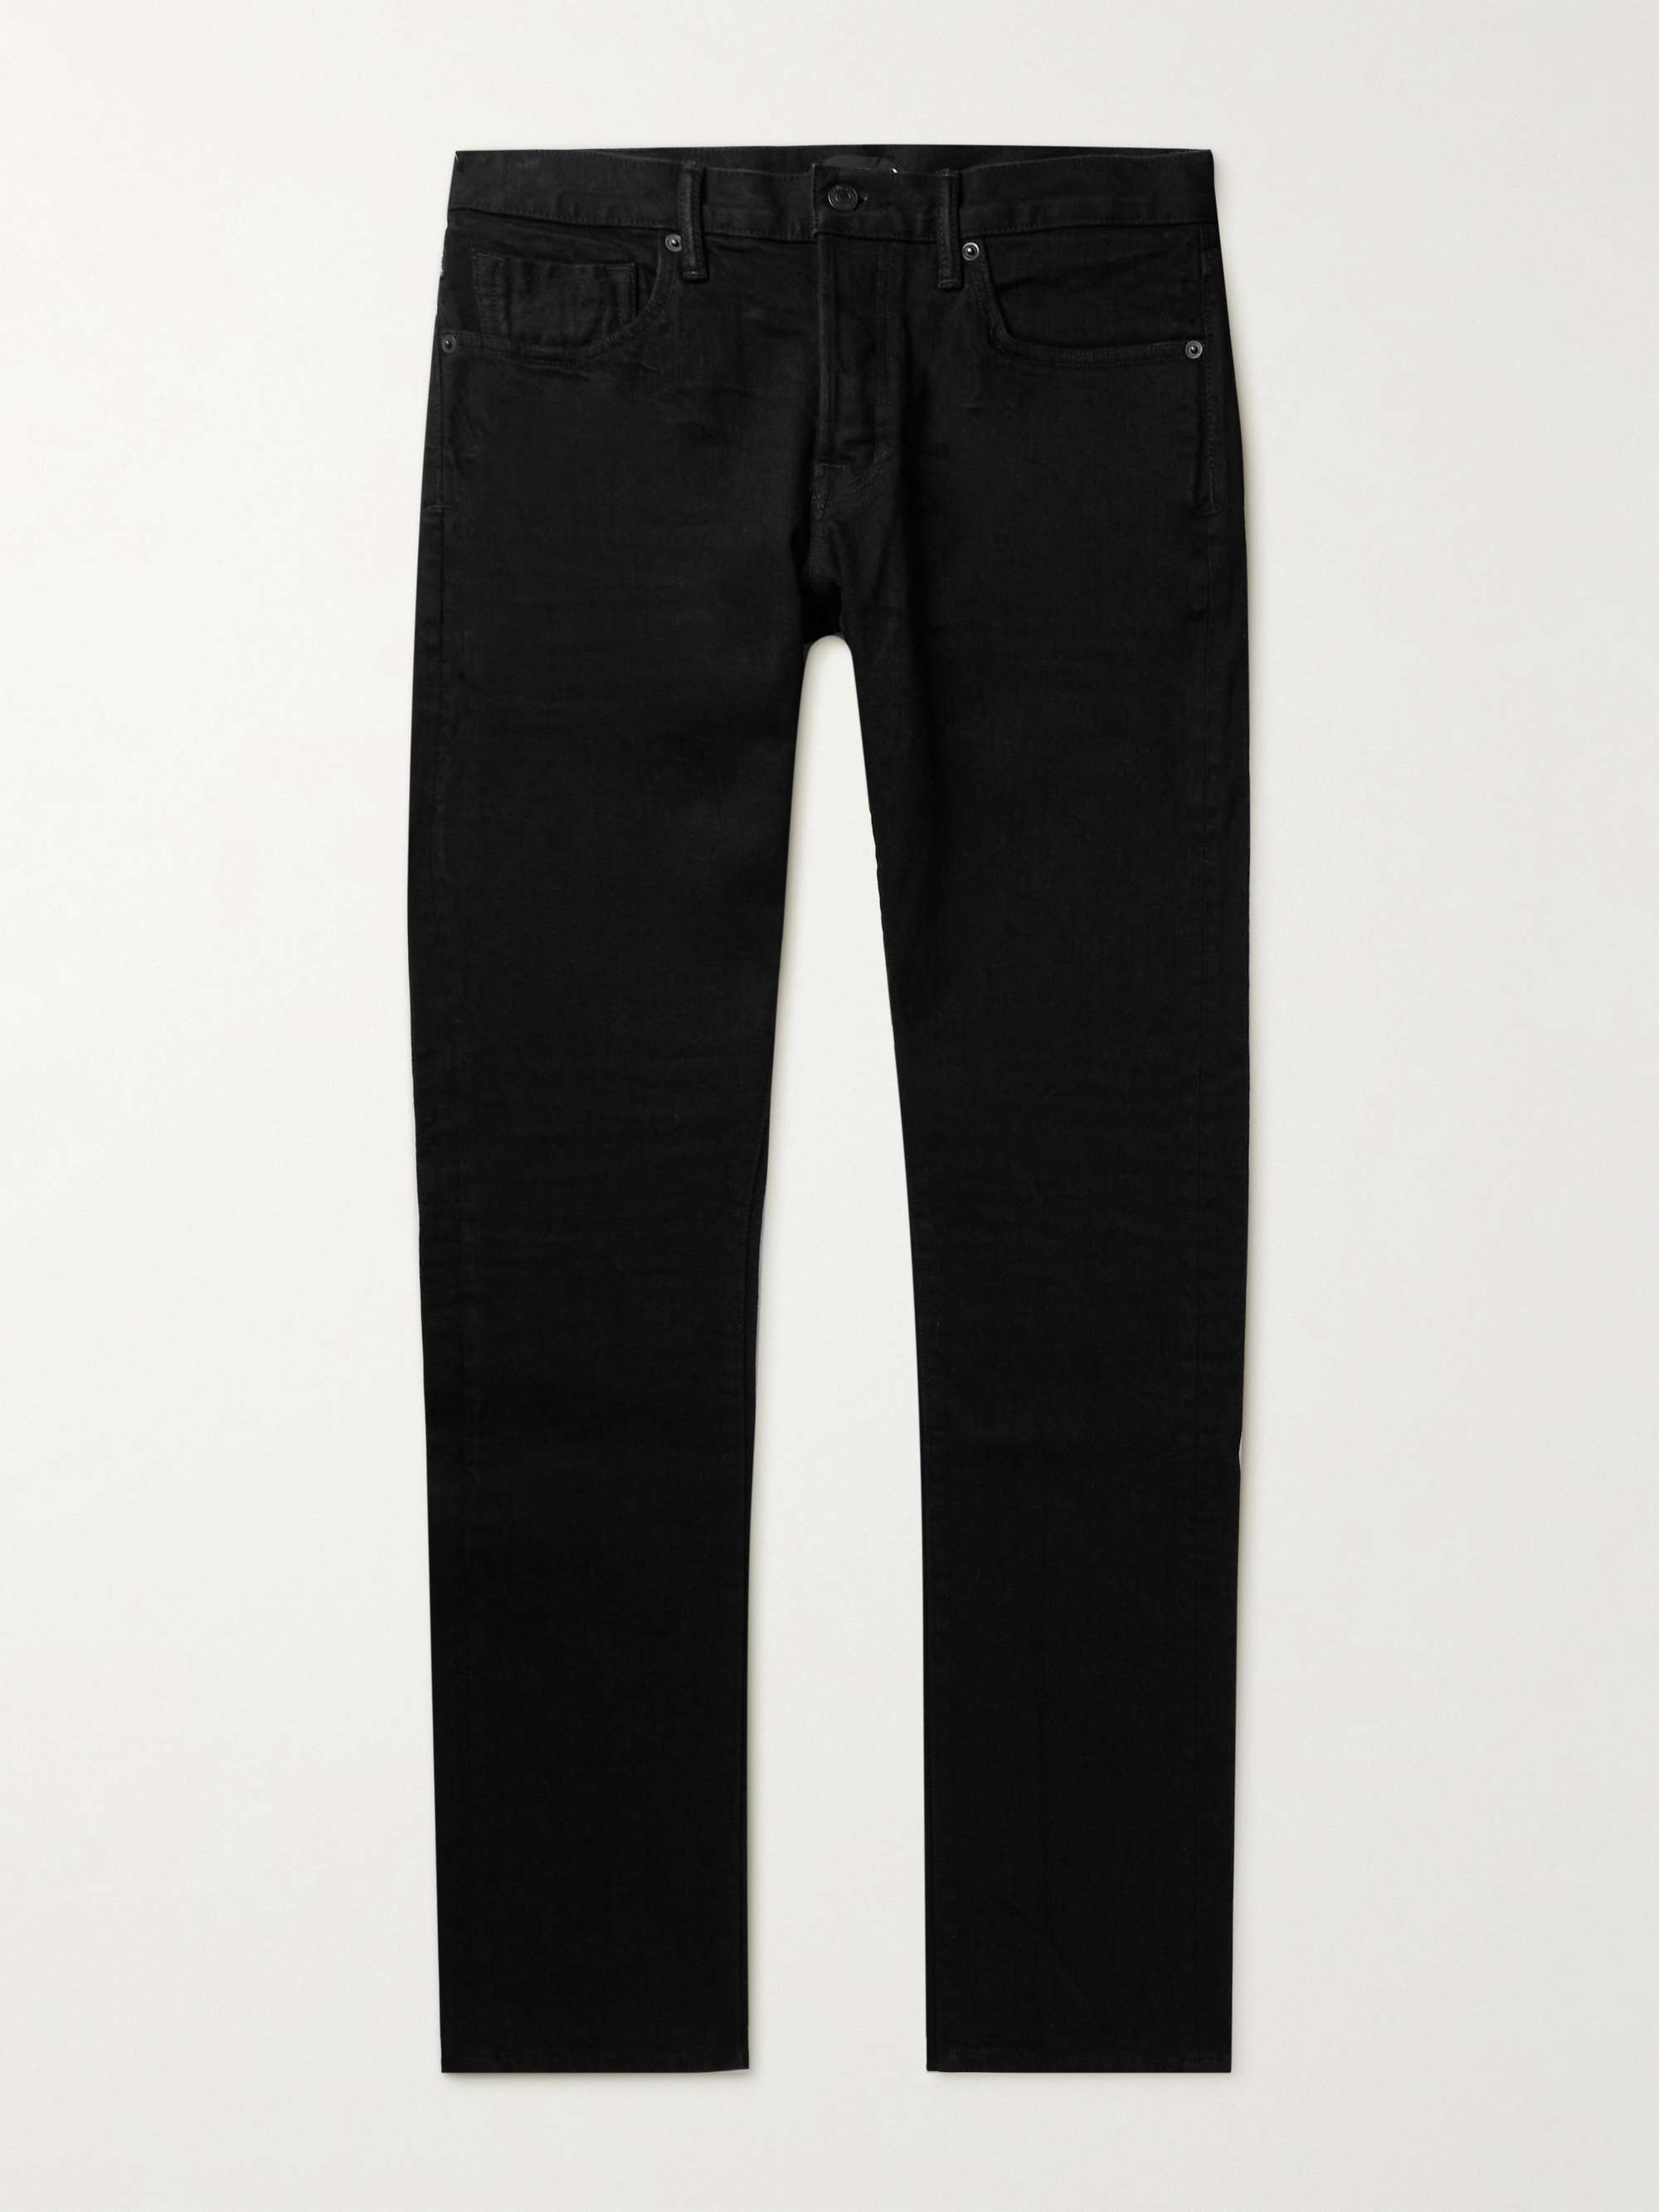 TOM FORD Slim-Fit Washed Selvedge Jeans